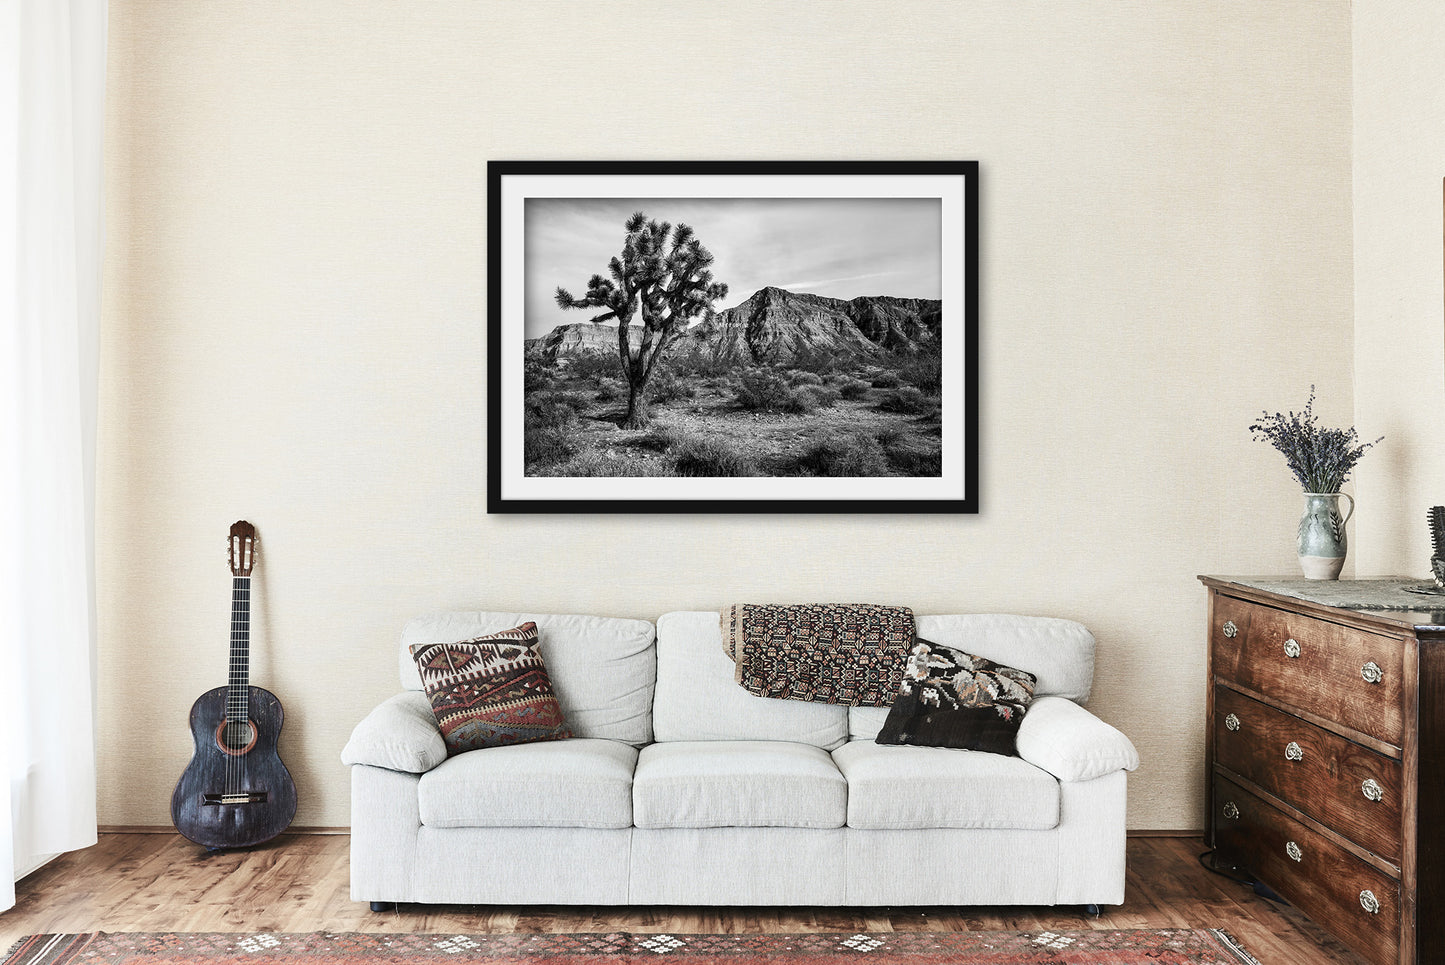 Southwest Wall Art - Framed and Matted Print Joshua Tree and Mountain in Arizona Desert - Ready to Hang Southwestern Landscape Photography